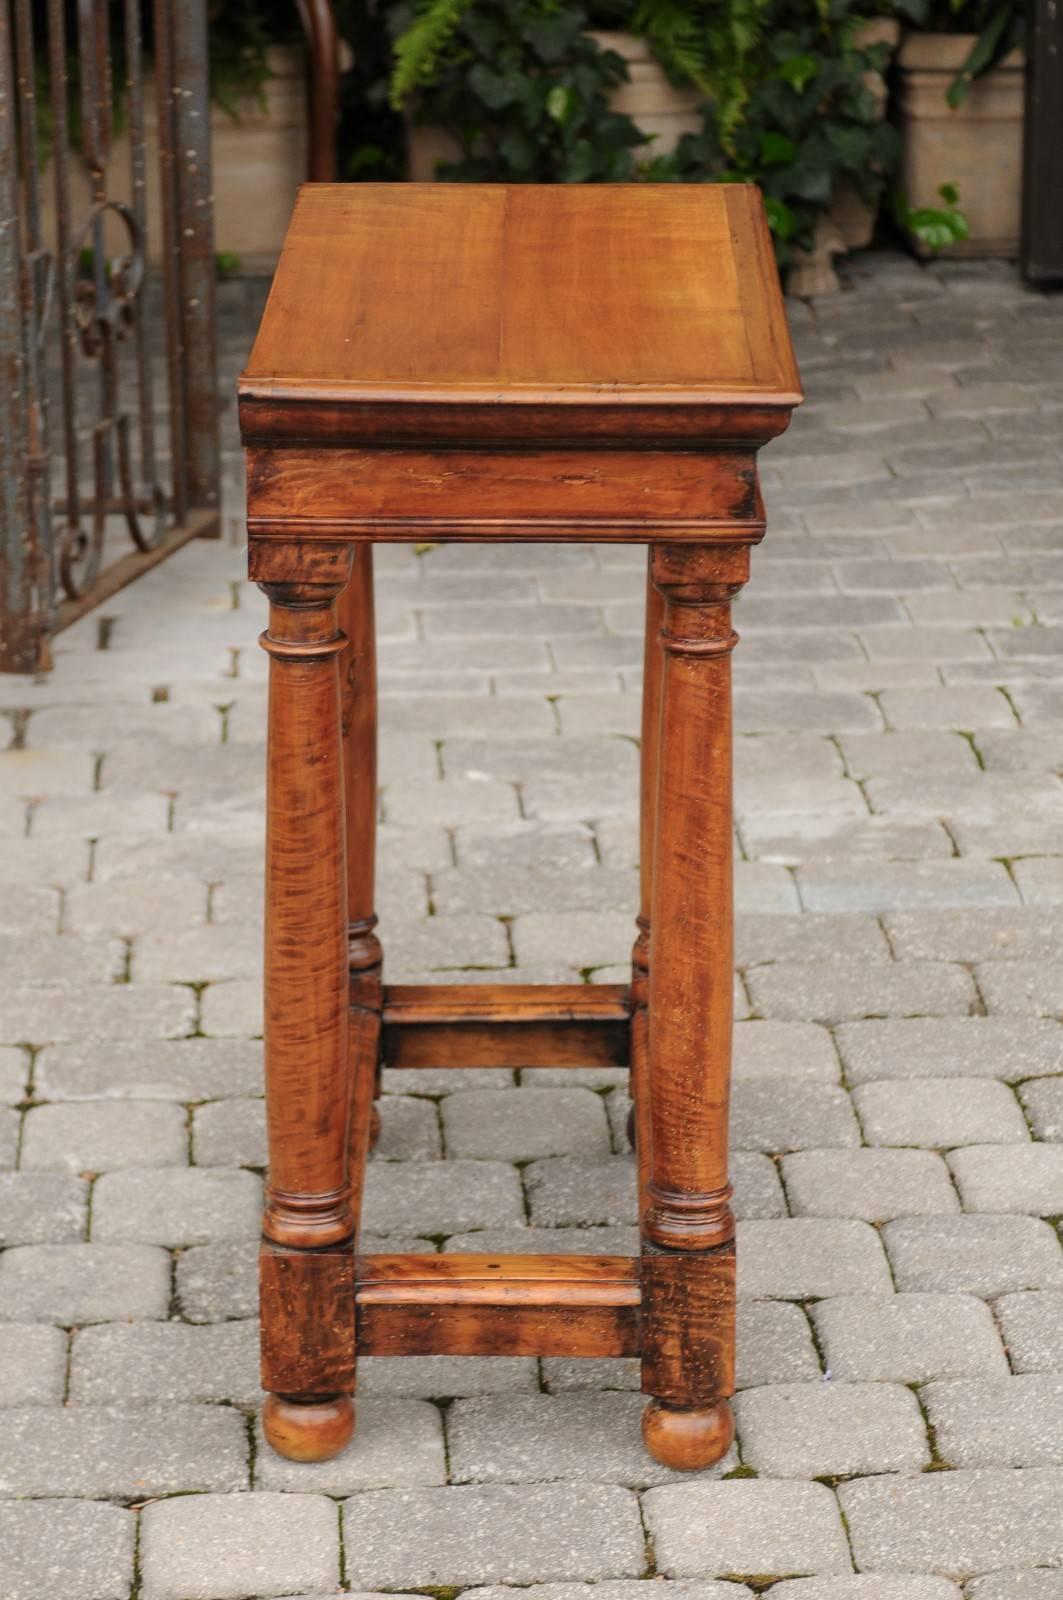 French Empire Style Mid-19th Century Fruitwood Side Table with Doric Column Legs For Sale 5